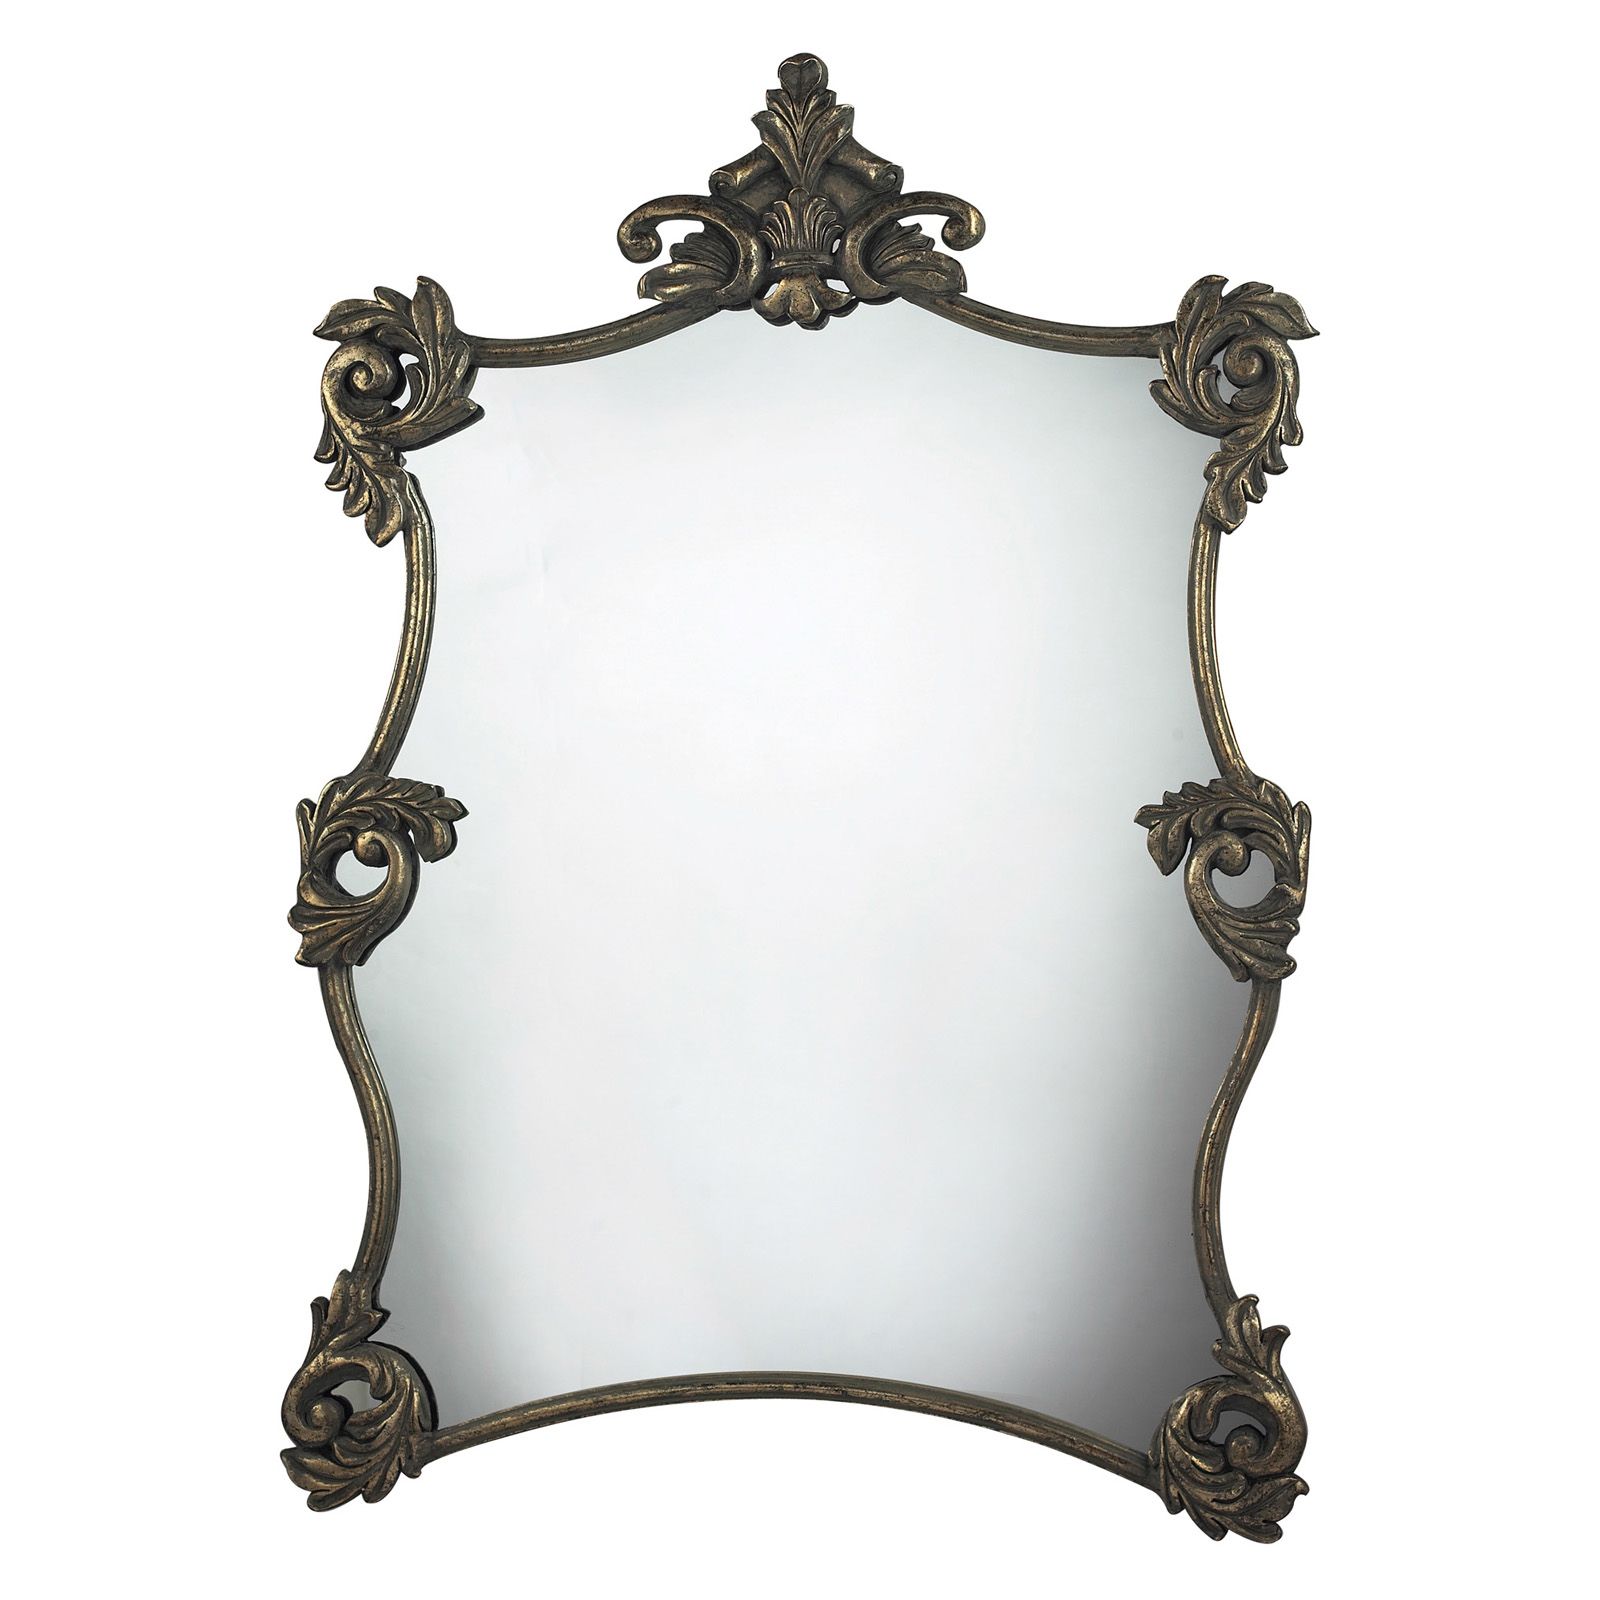 Elk Lighting Moorefield Fleur De Lis Oversize Arched Wall Mirror – 30W In Arch Oversized Wall Mirrors (View 7 of 15)